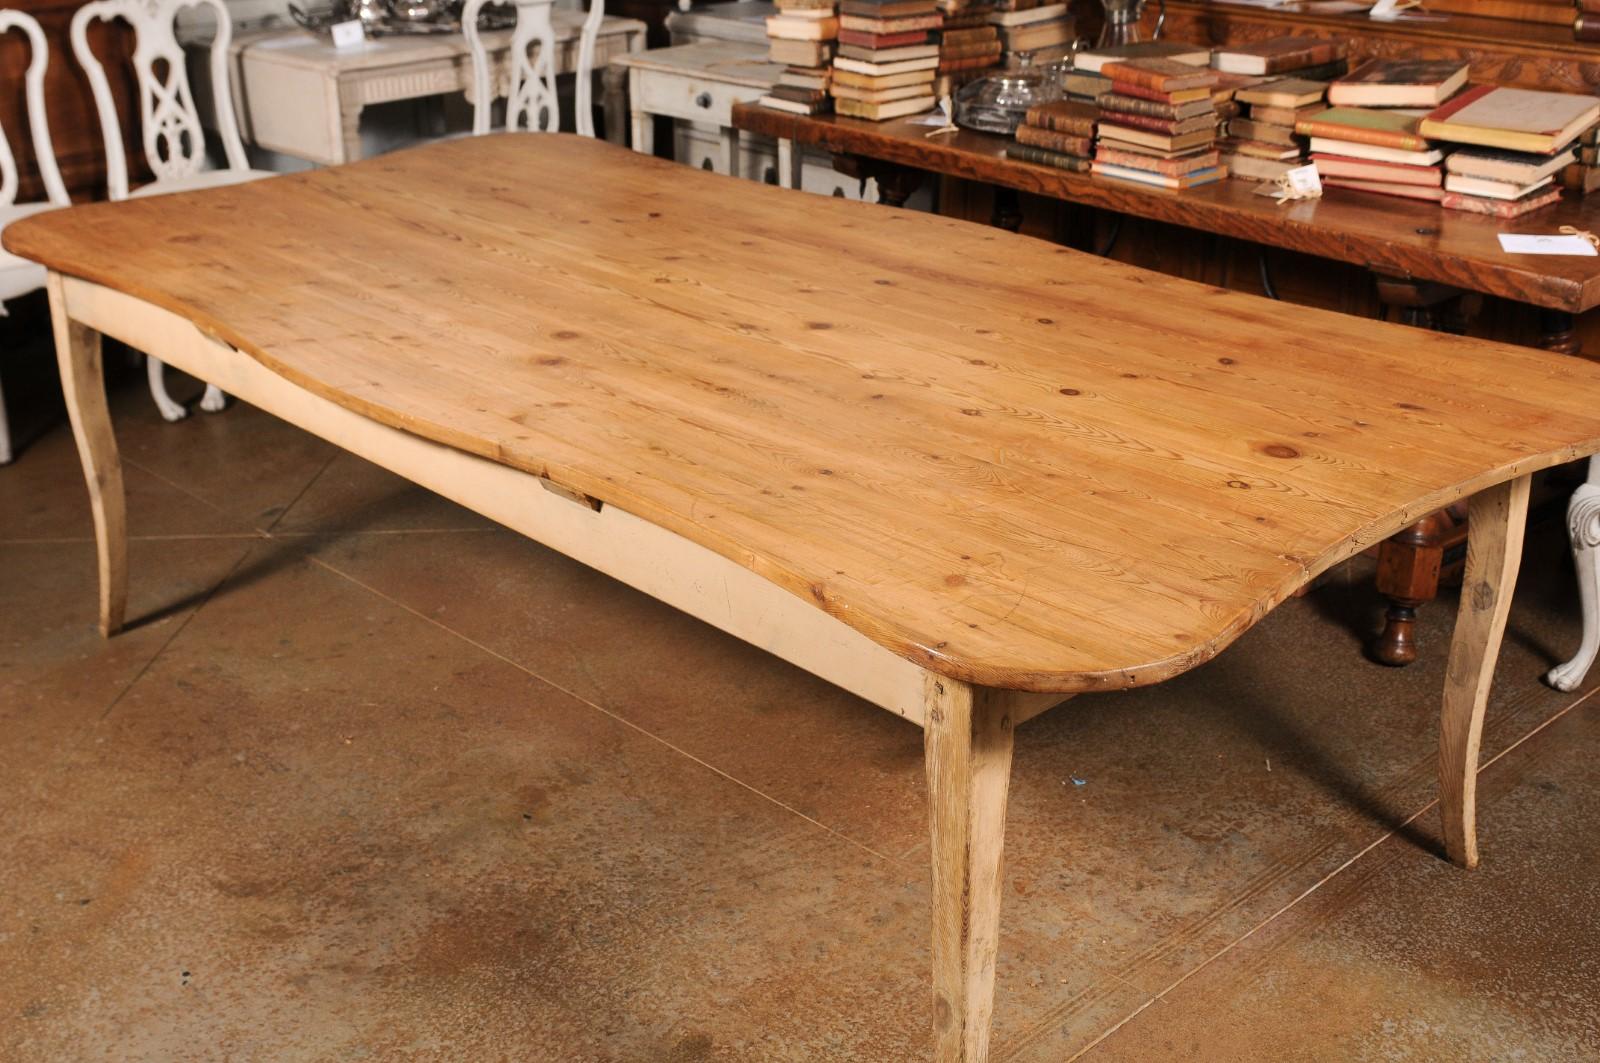 19th Century French Restauration 1820s Fir Wood Distressed Farm Table with Serpentine Top